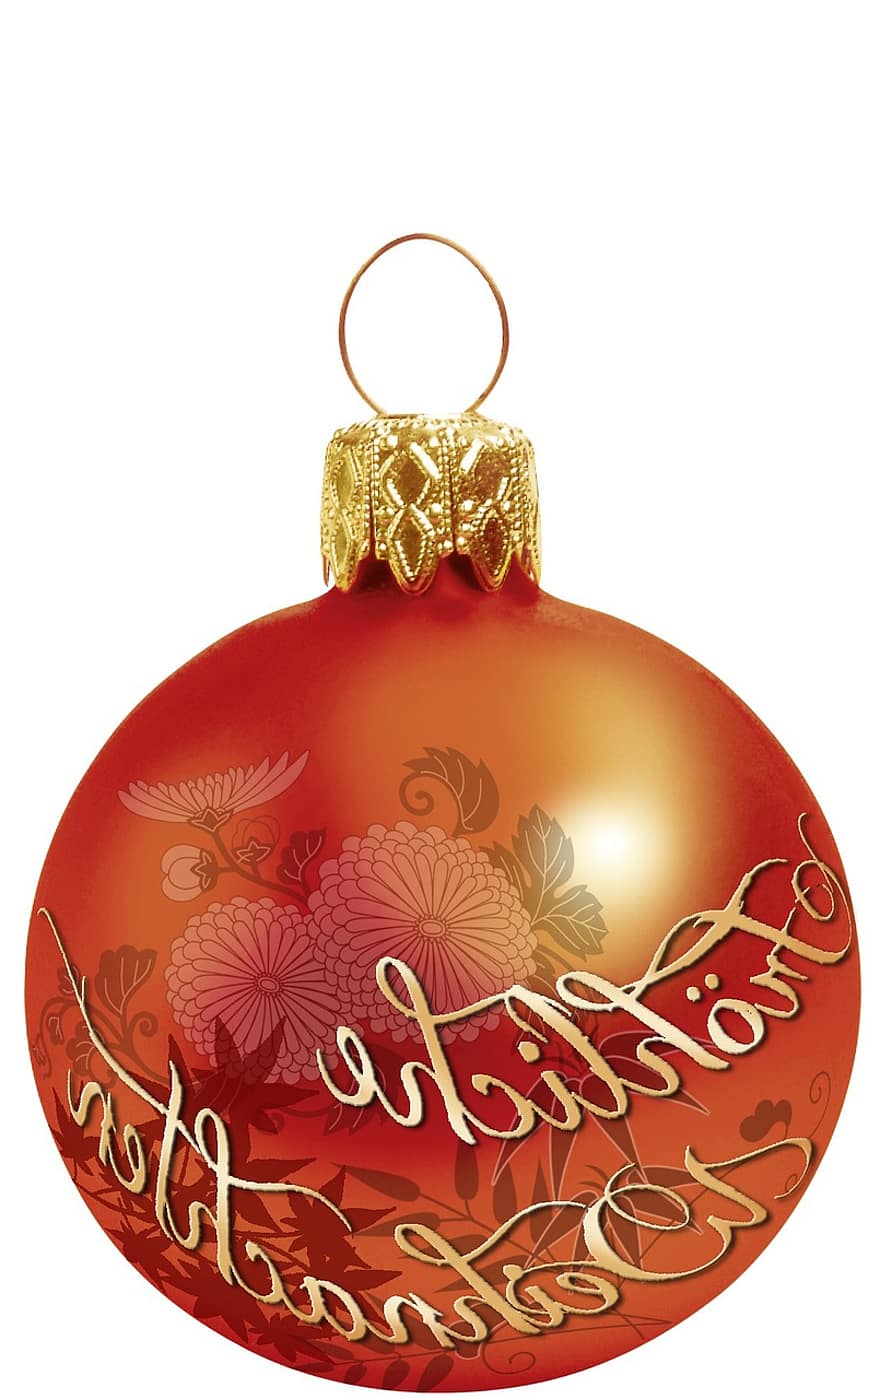 Graphic, Christmas Ornament, Design, Cut Out, Red, Orange, Fernöstlich, Japanese, Gold, Handwriting, Calligraphy